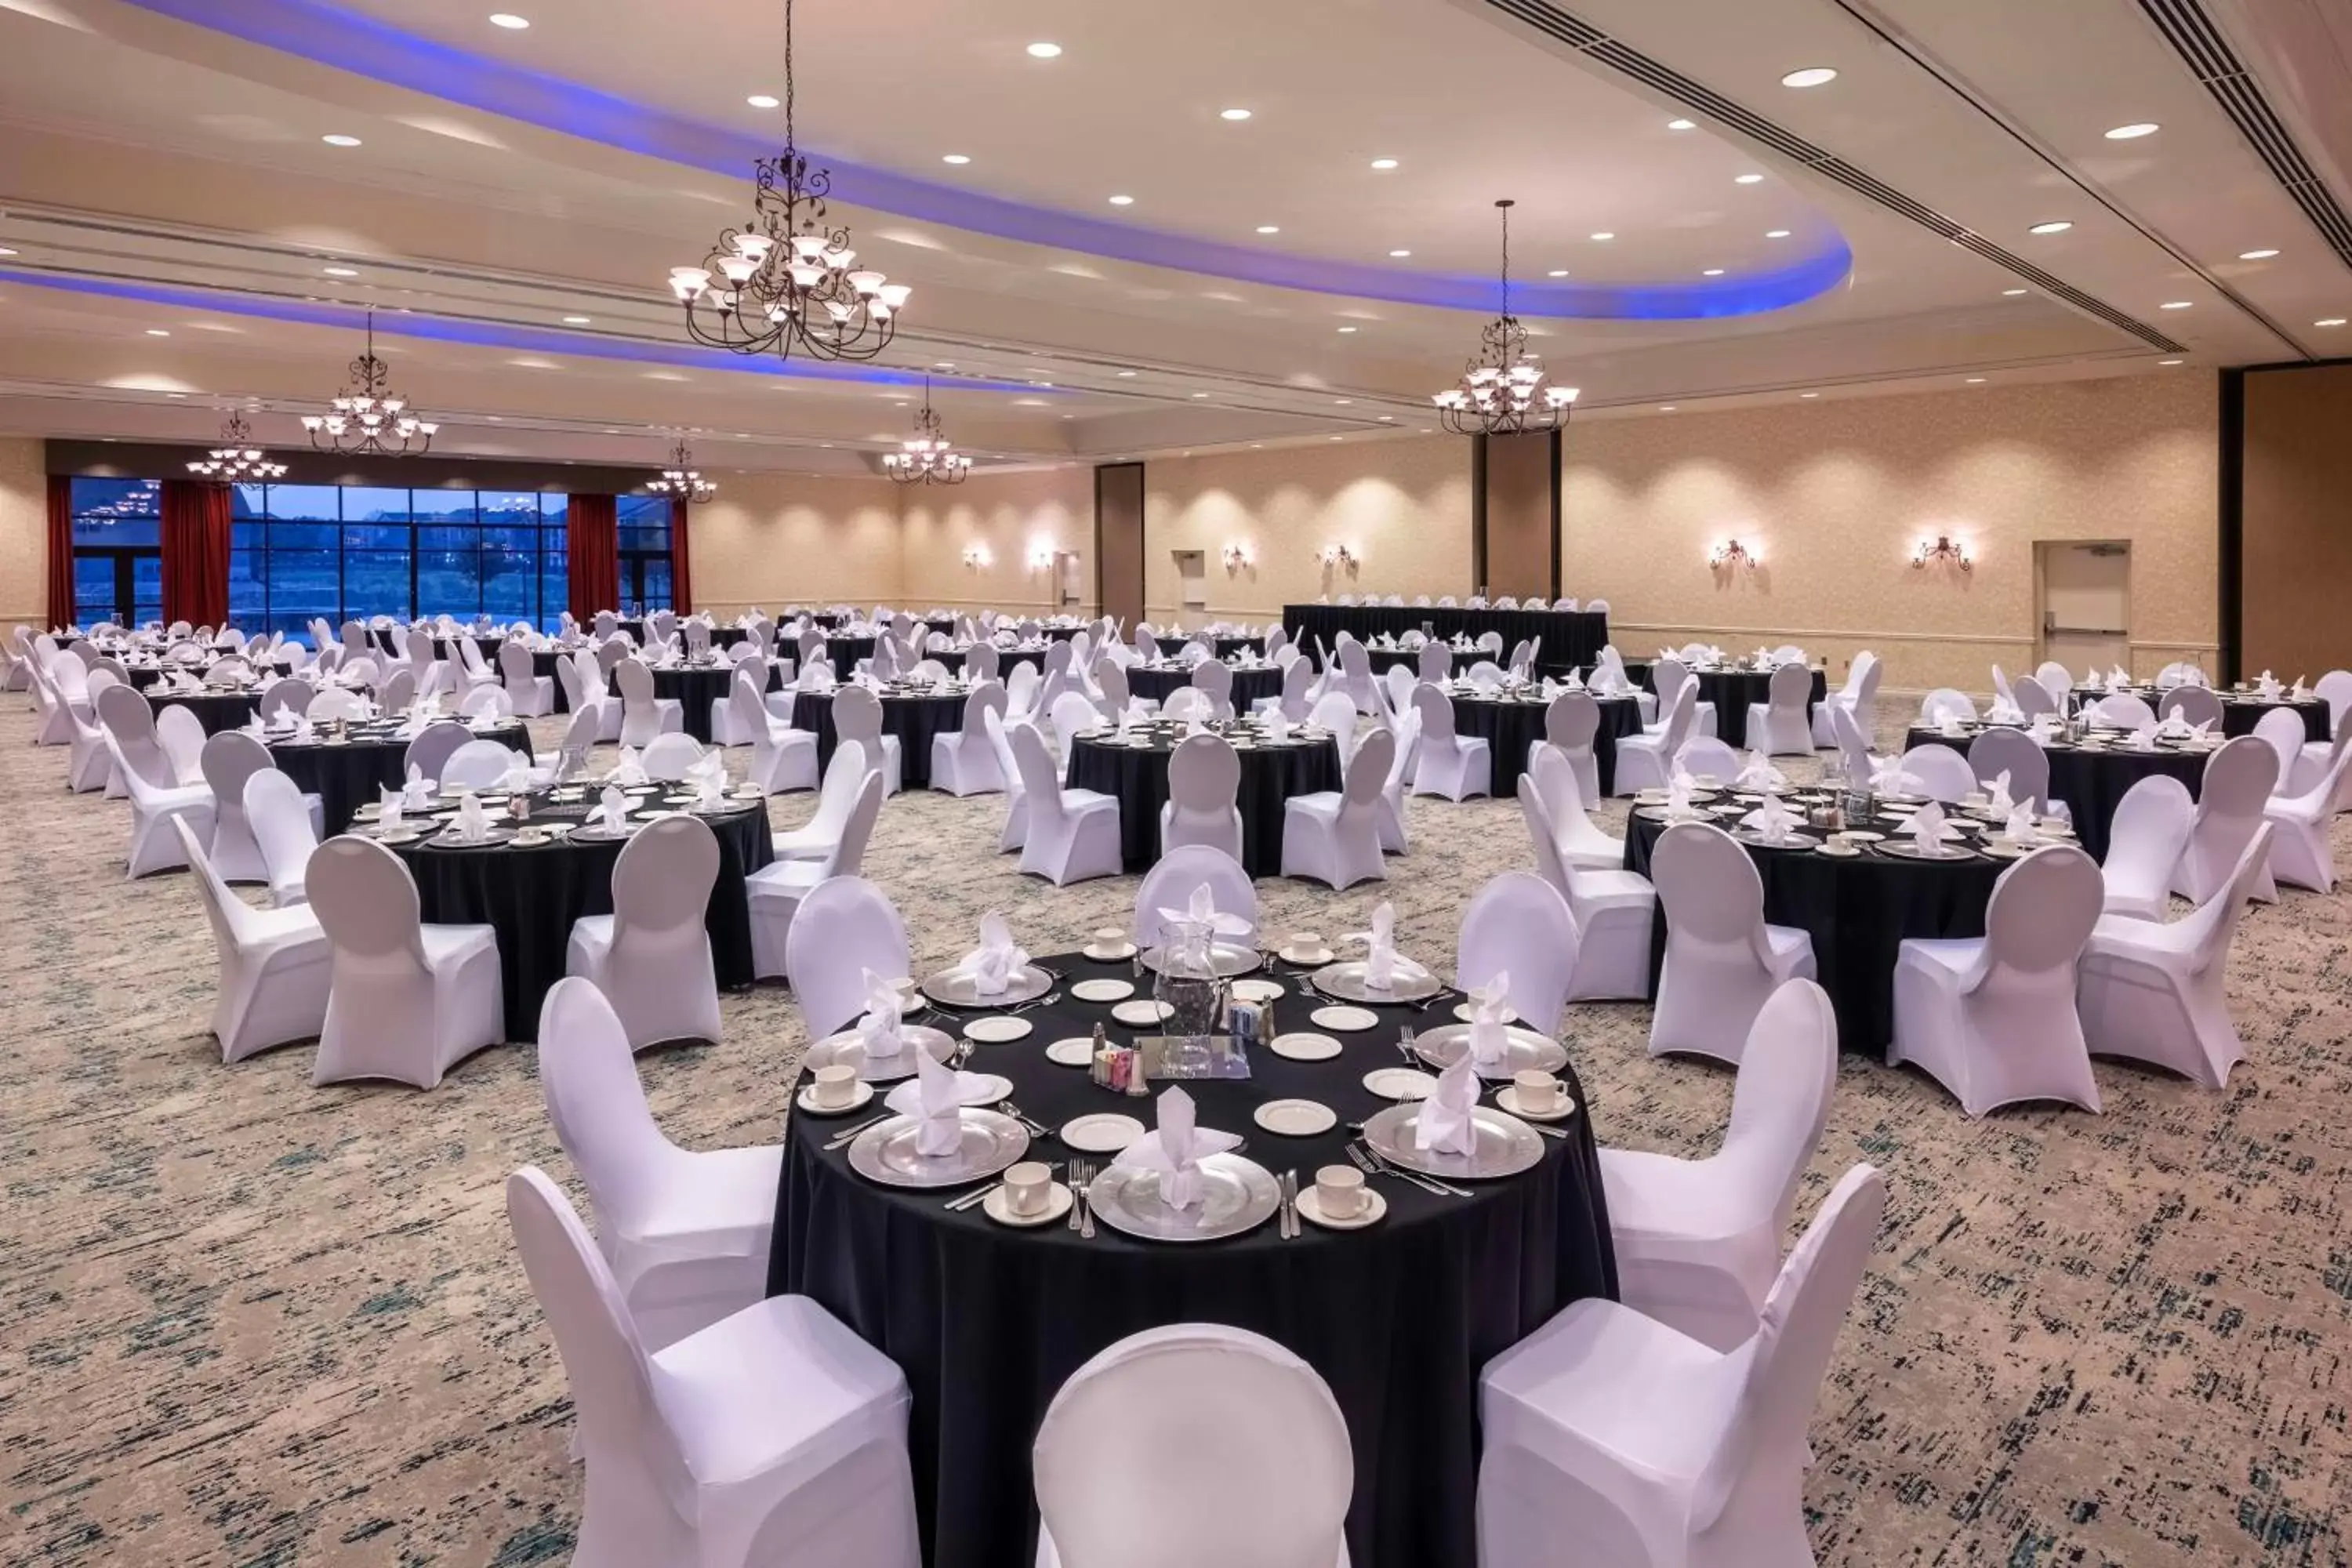 Meeting/conference room, Banquet Facilities in Hilton Garden Inn Dallas Lewisville